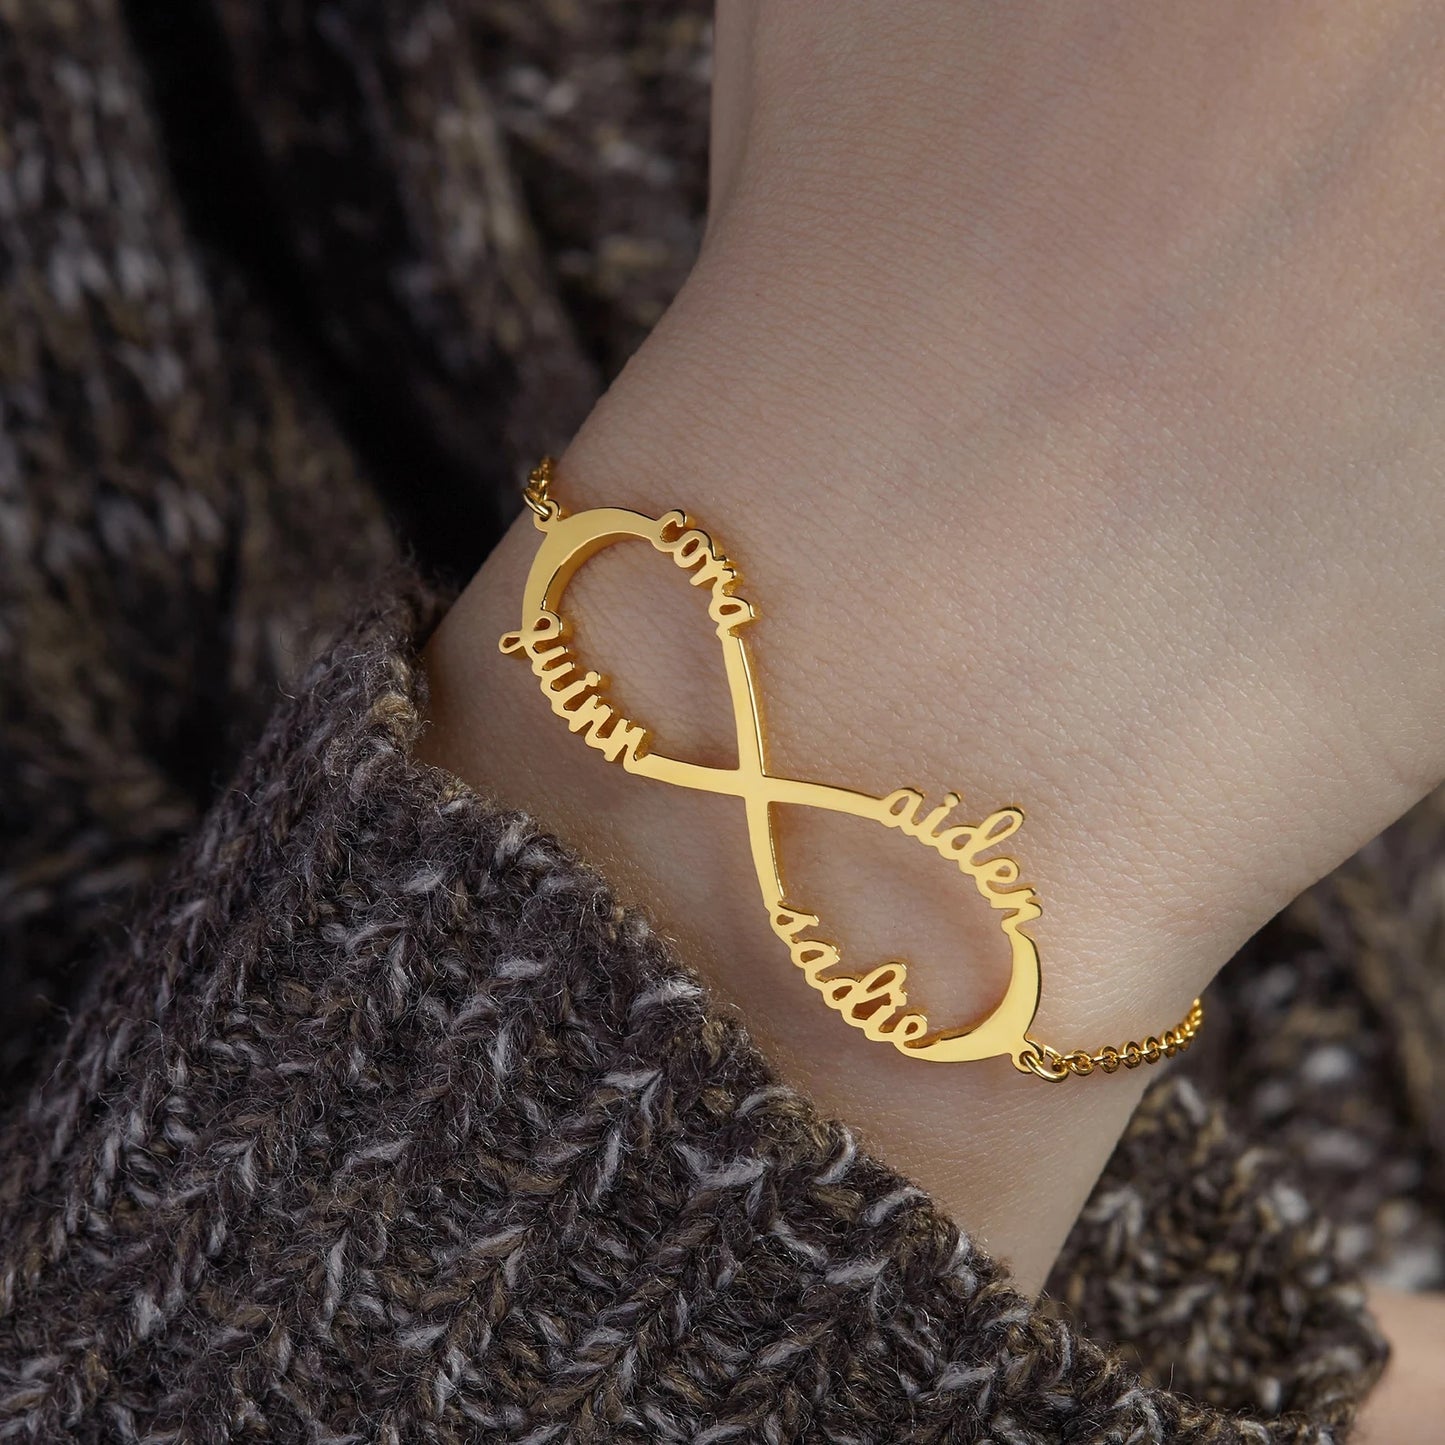 Infinity Bracelet With Names